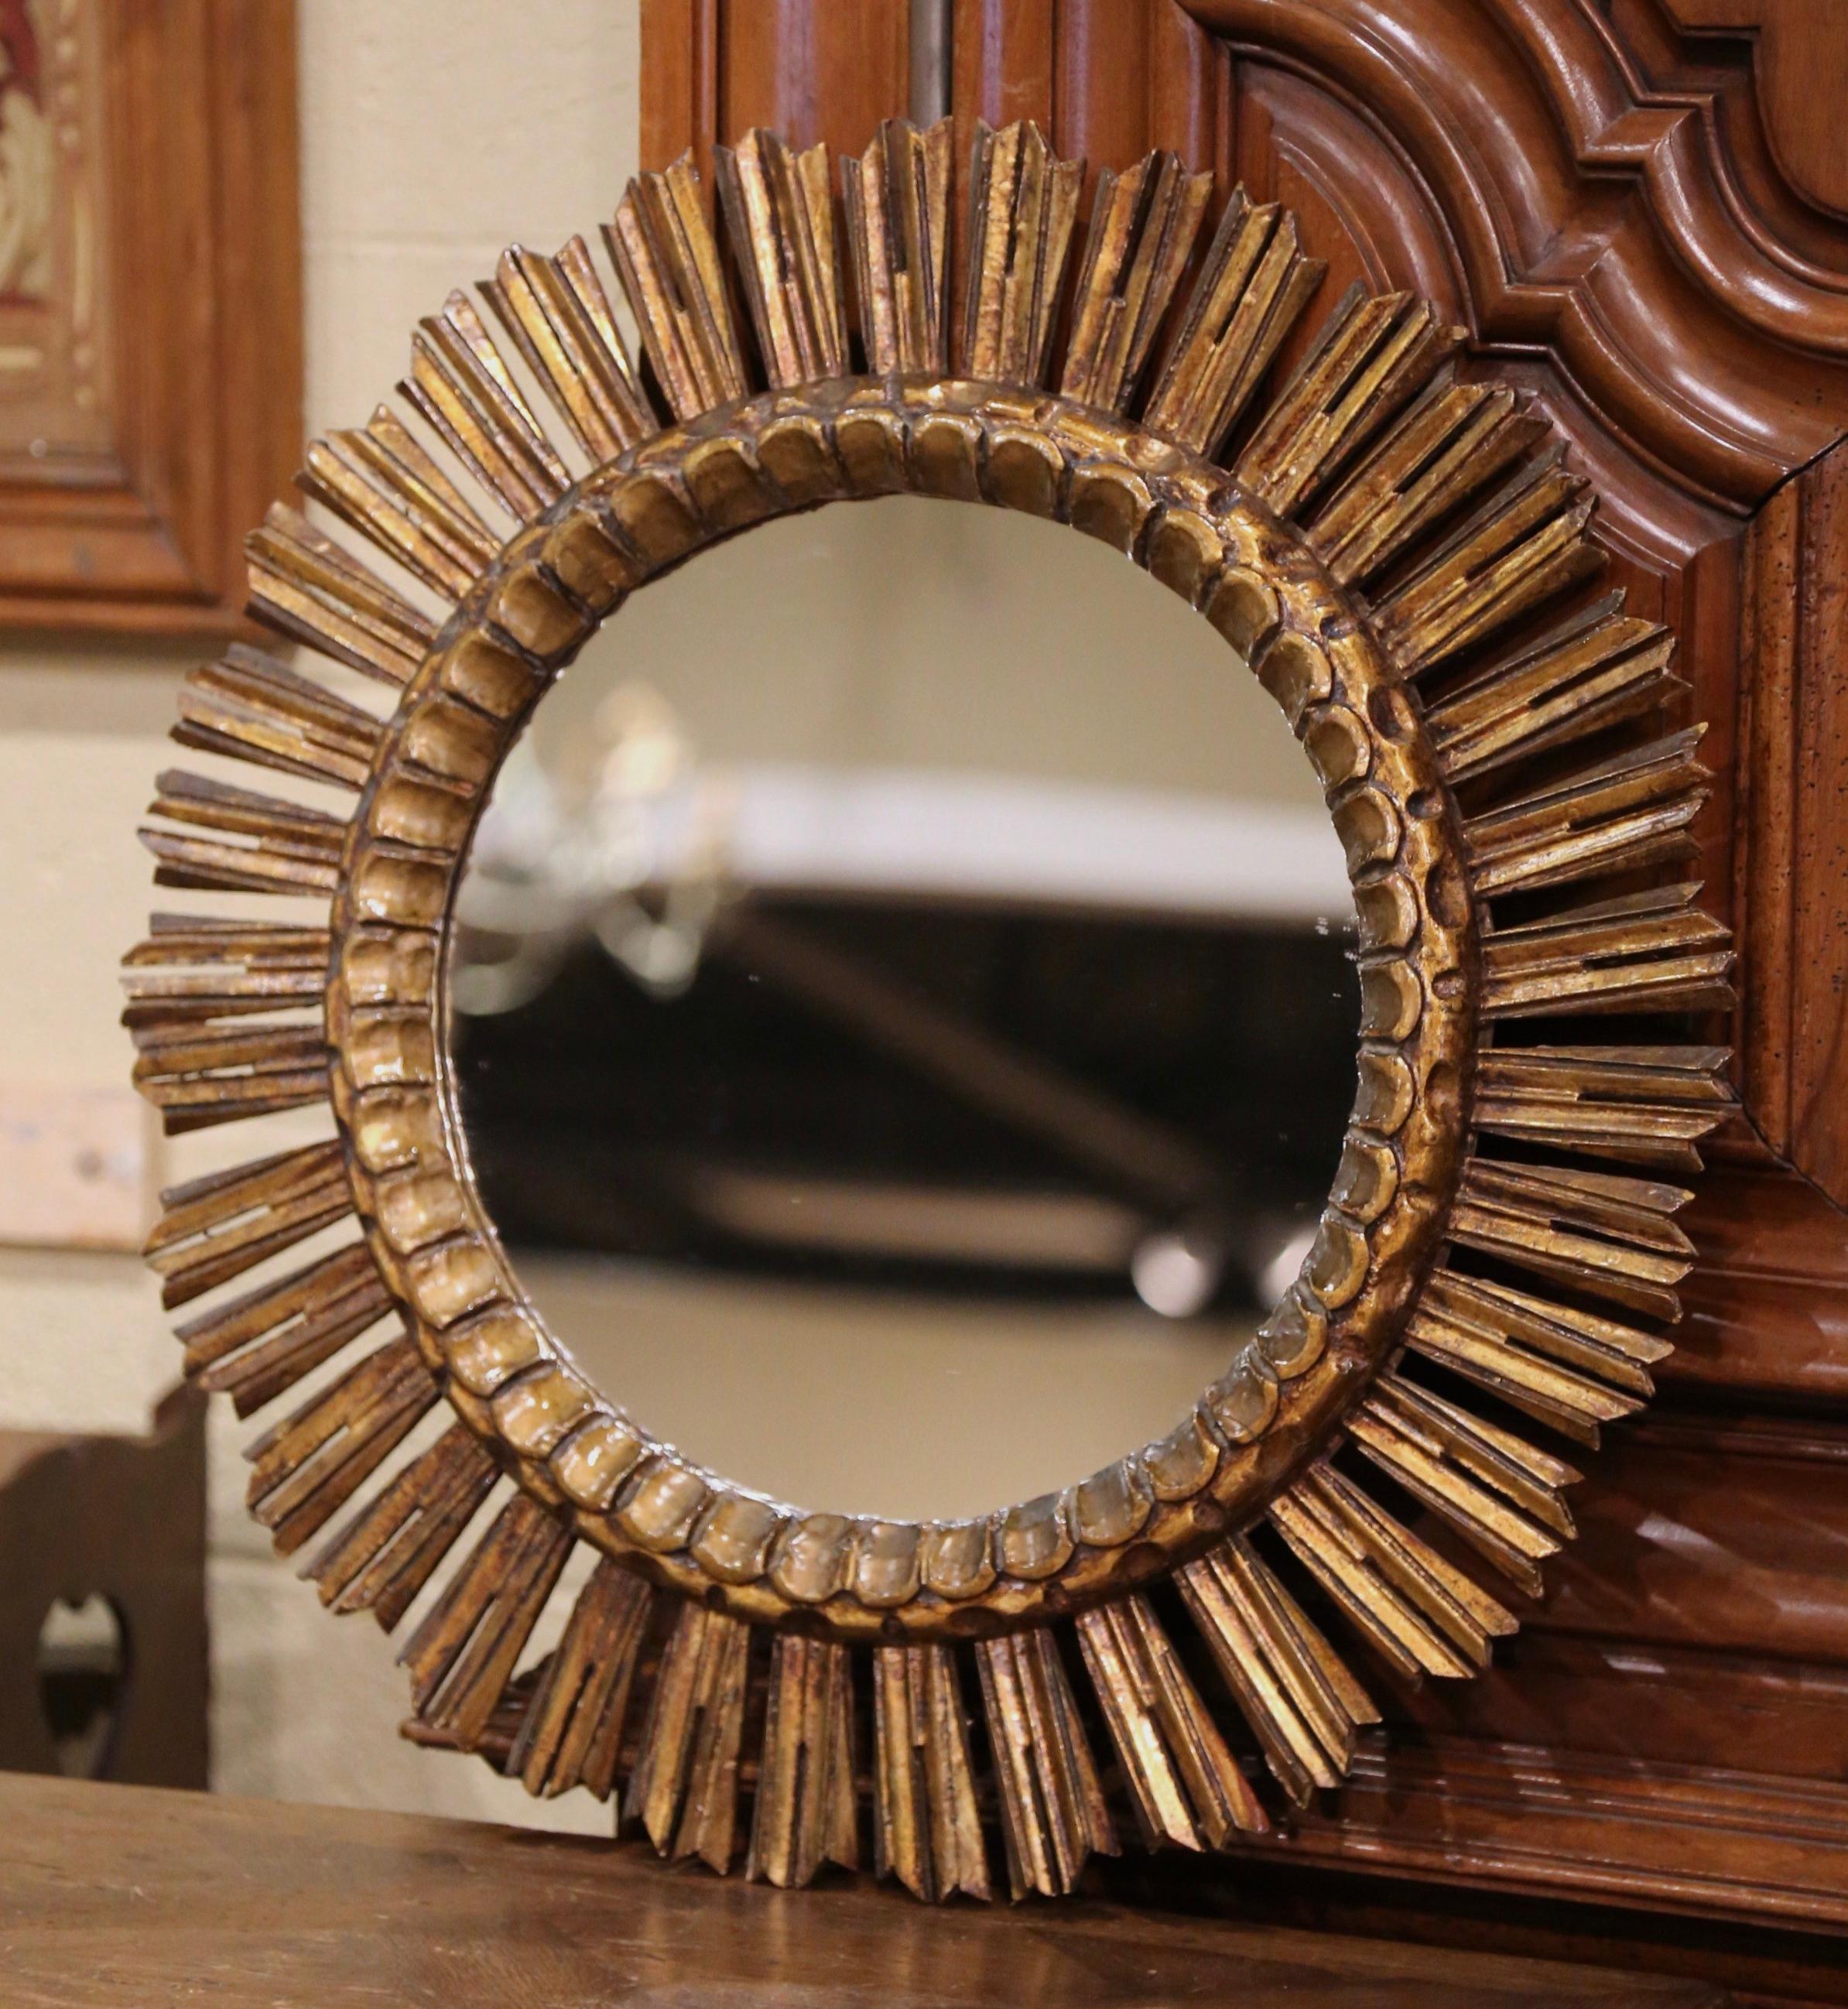 Incorporate extra light into any room with this large vintage sun mirror. Crafted in France, circa 1930 and round in shape, the decorative mirror has intricate carvings throughout and resembles the shape and shine of the sun. The sunburst mirror is